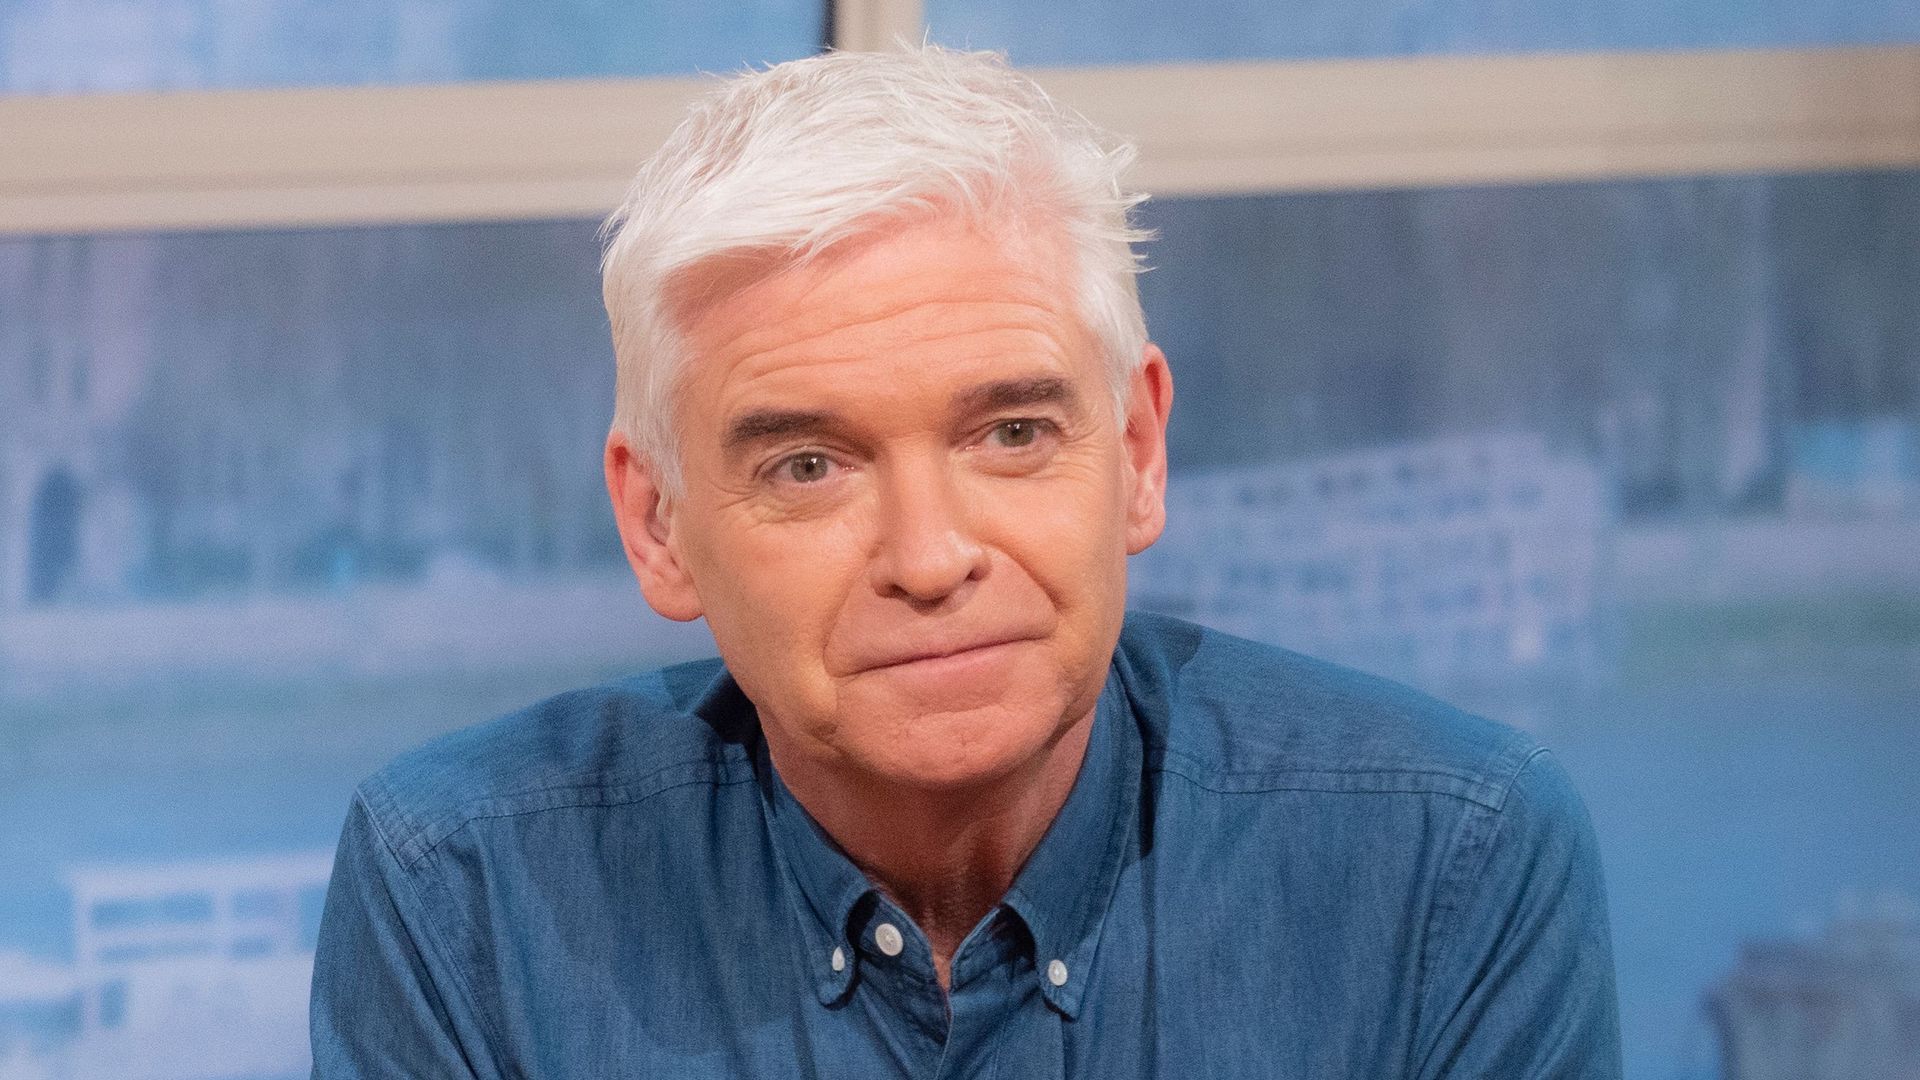 Phillip Schofield Puts £1 2m Home With Wife Steph On The Market After This Morning Axe Hello